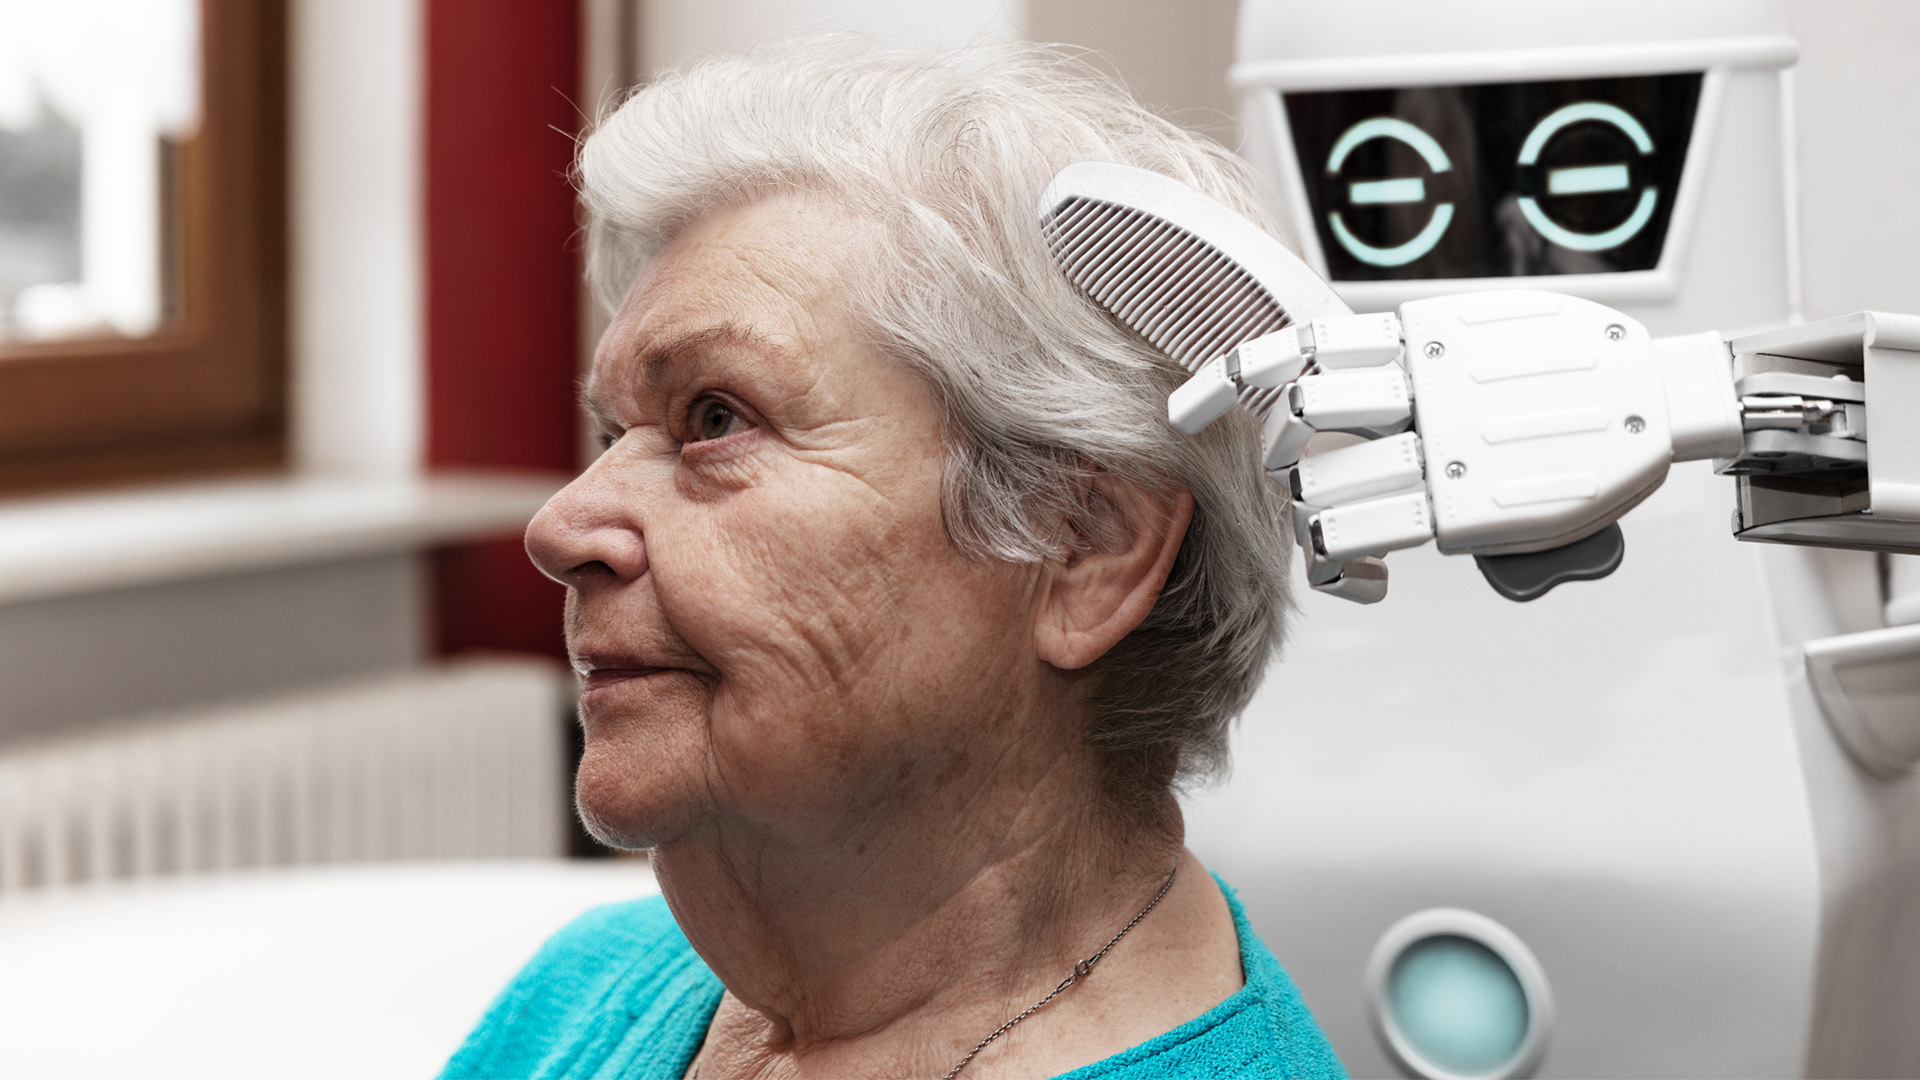 video Shining Slid The UK government are funding elderly care robots - Health Europa